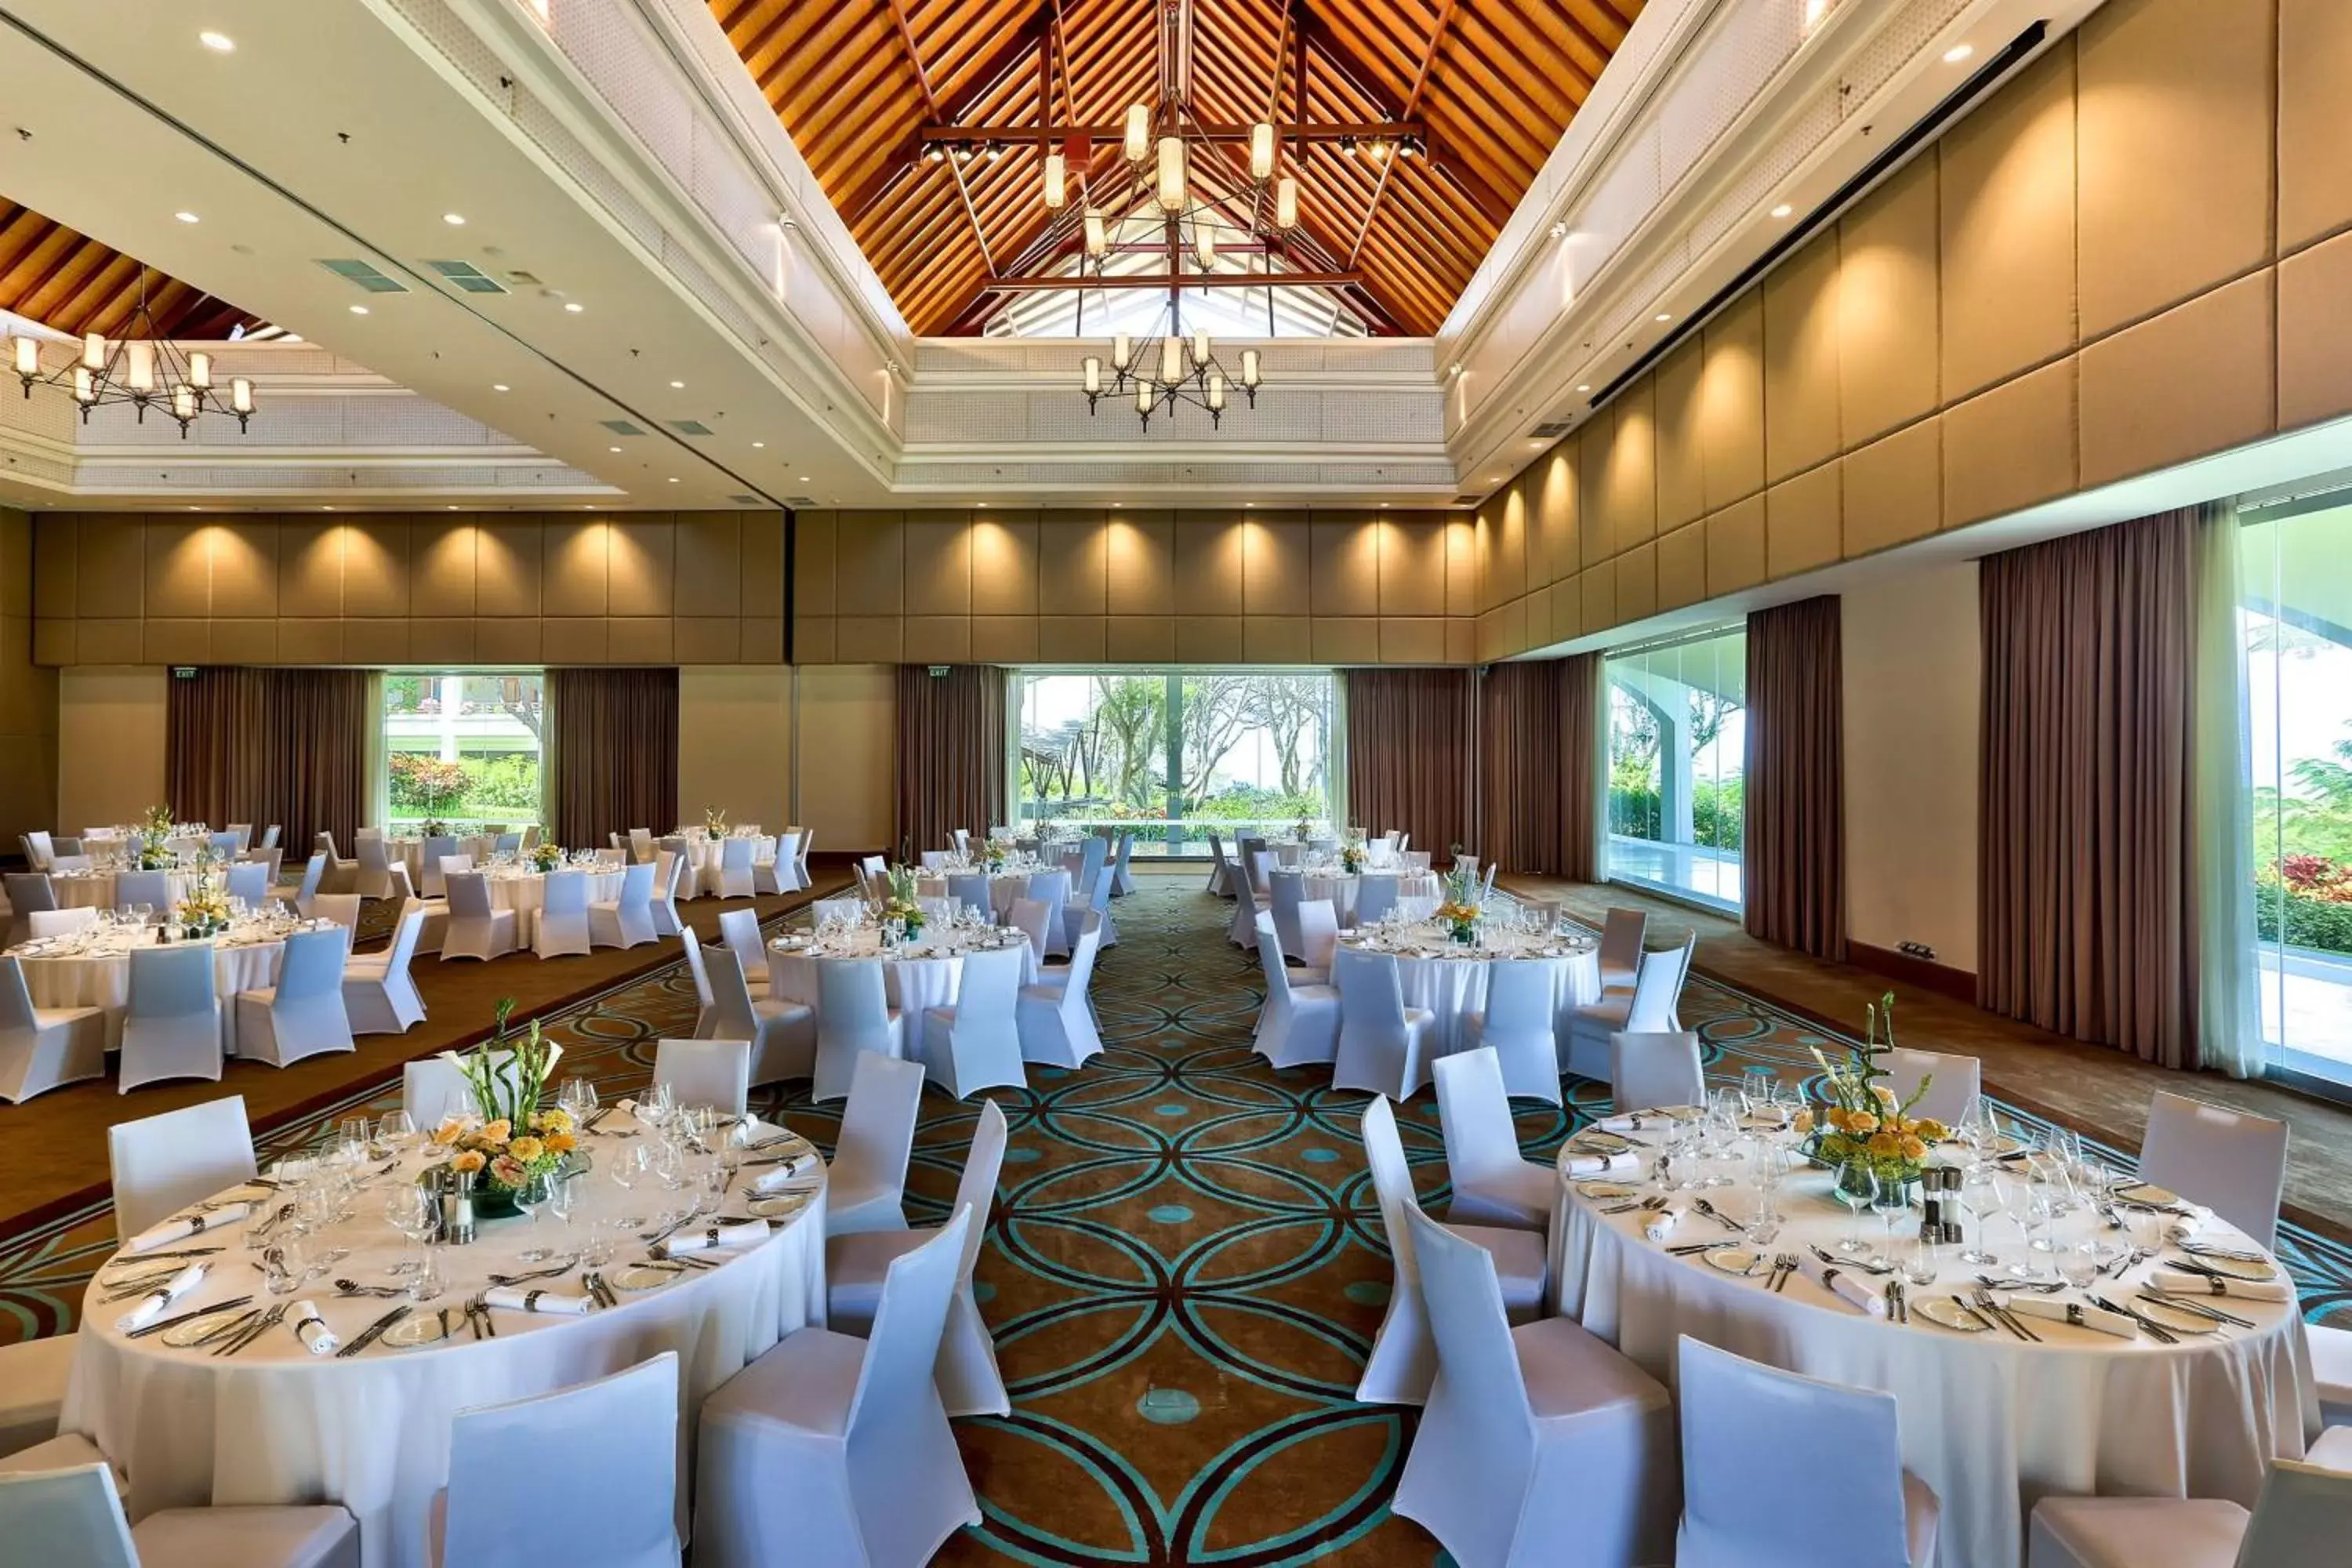 Meeting/conference room, Banquet Facilities in Hilton Bali Resort